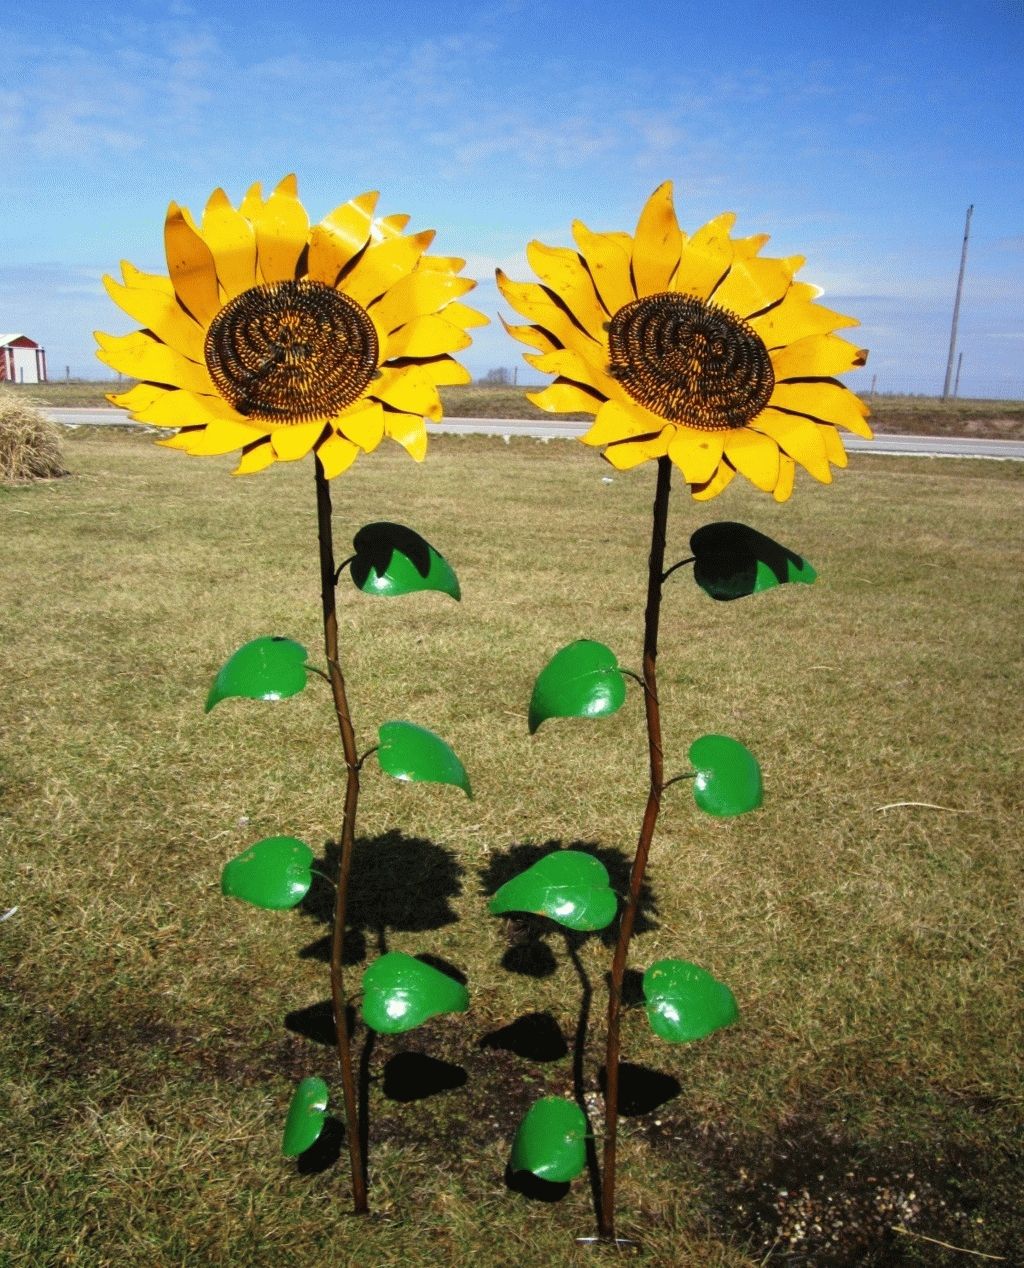 67" Recycled Metal Giant Sunflower Stake – Yard Decor Intended For Metal Sunflower Wall Art (View 7 of 20)